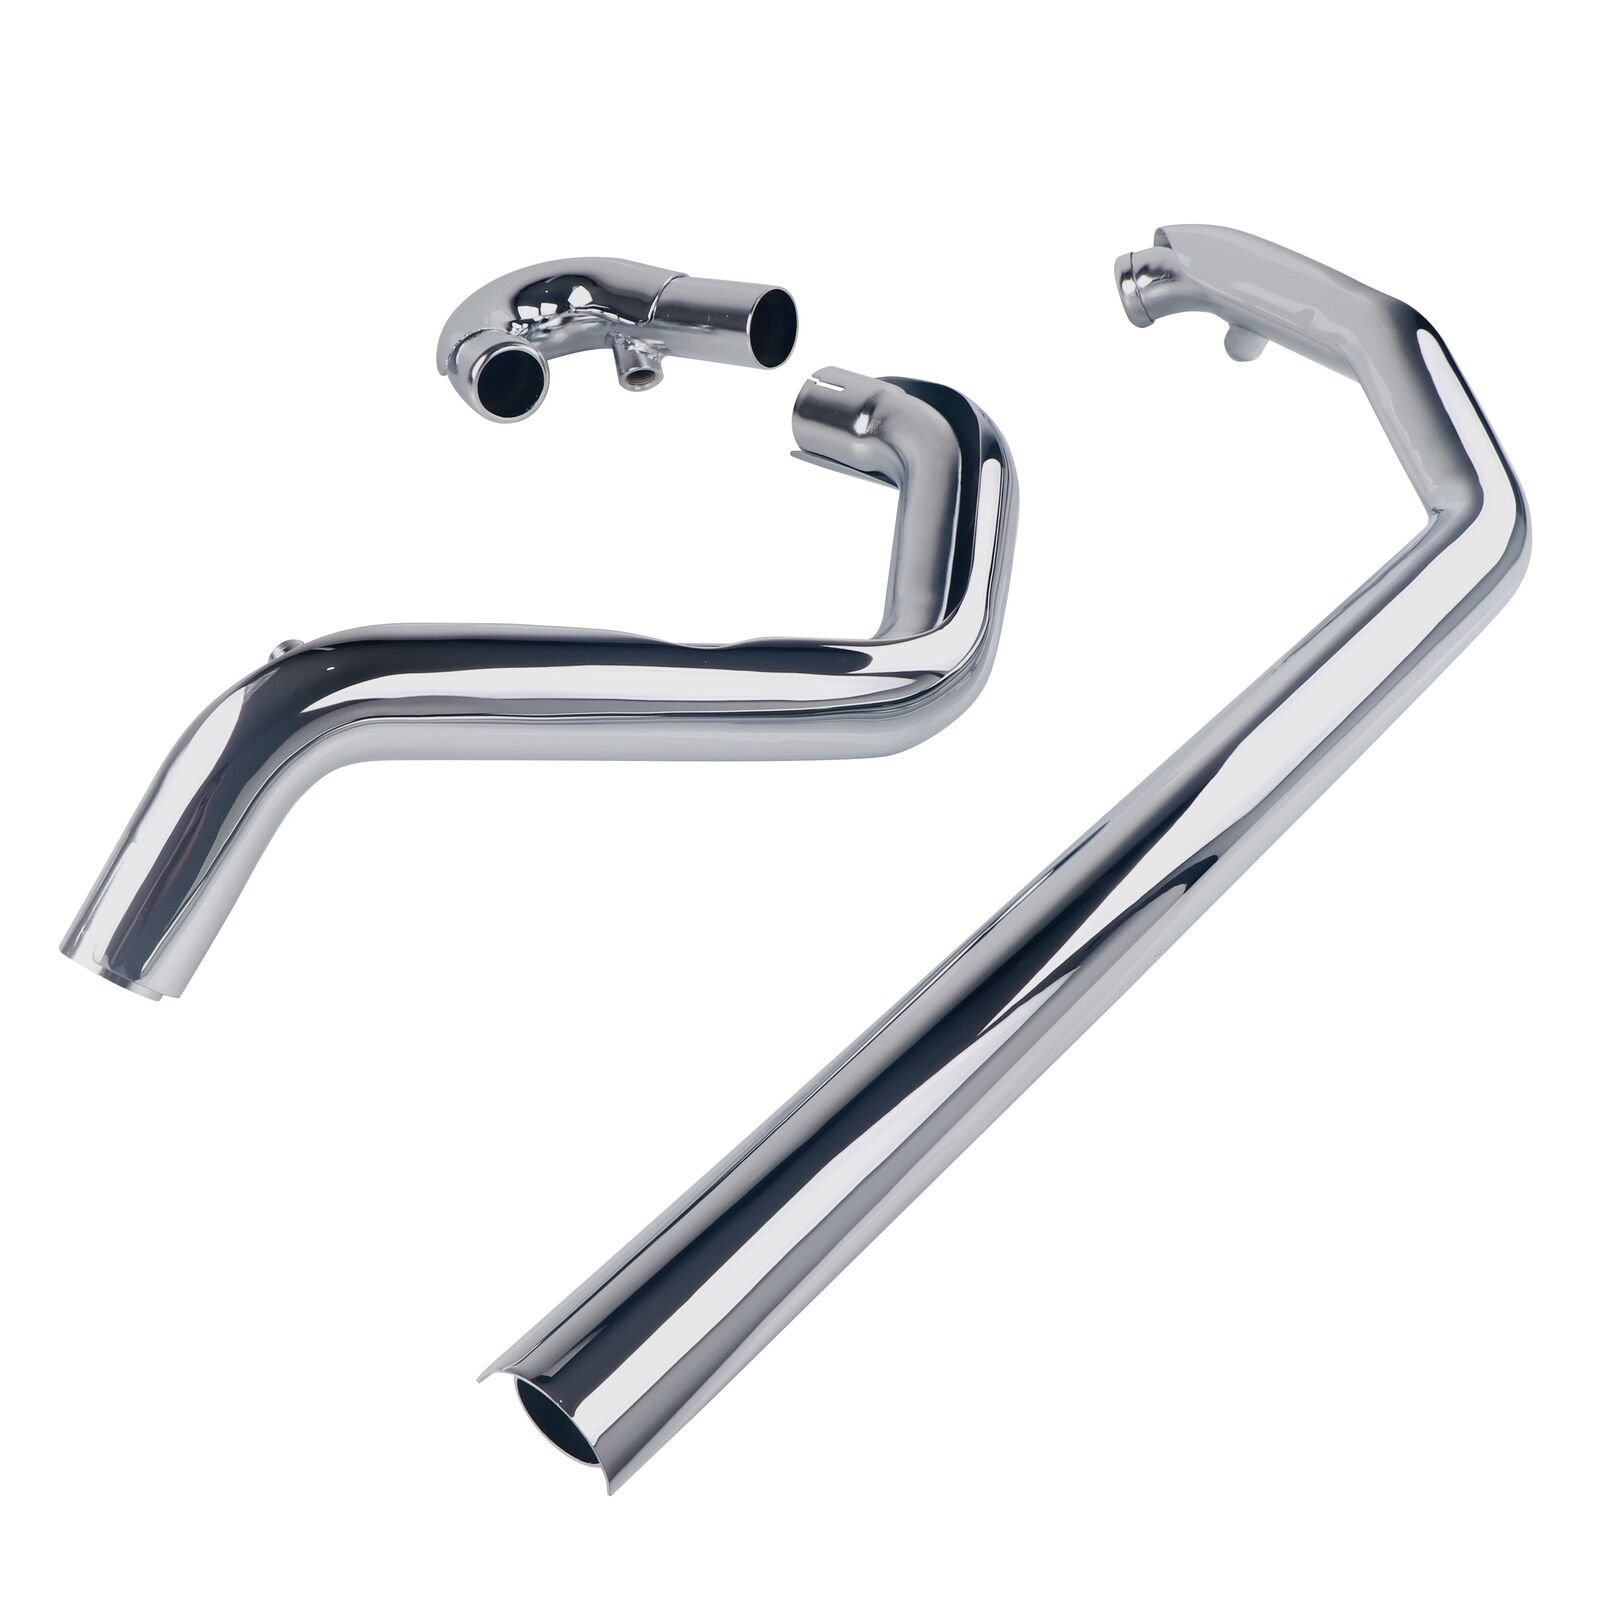 SHARKROAD Headers for True Dual Exhaust for Harley 95-16 Touring, Street Glide